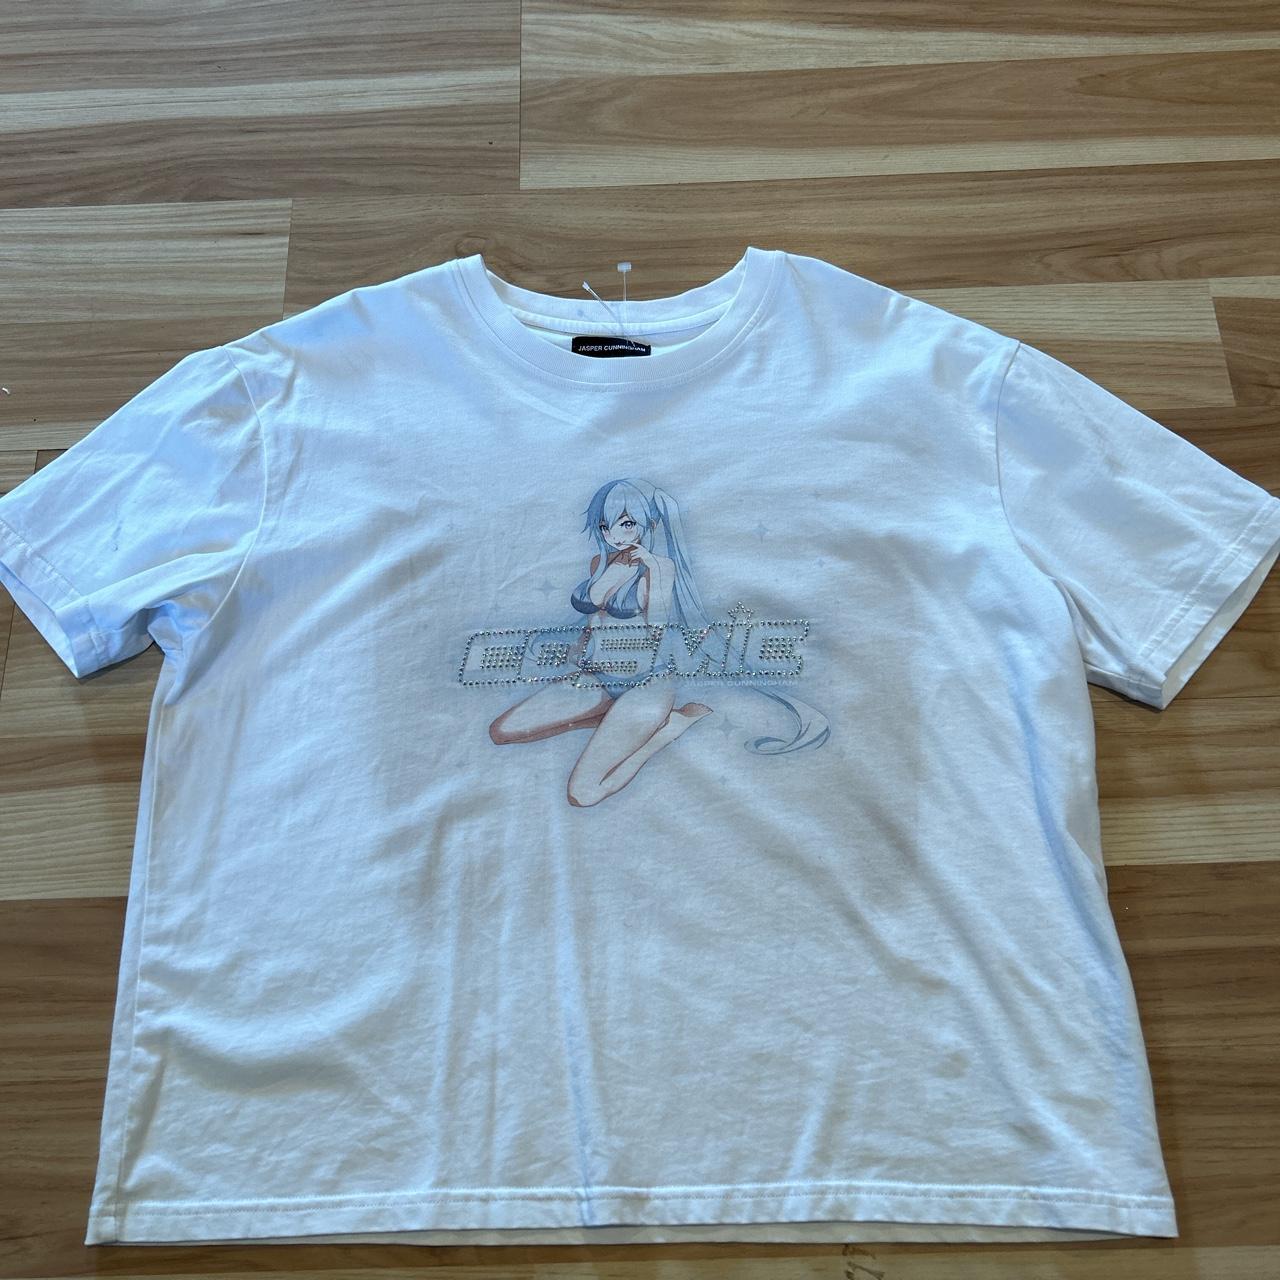 Off-White Women's White and Blue T-shirt